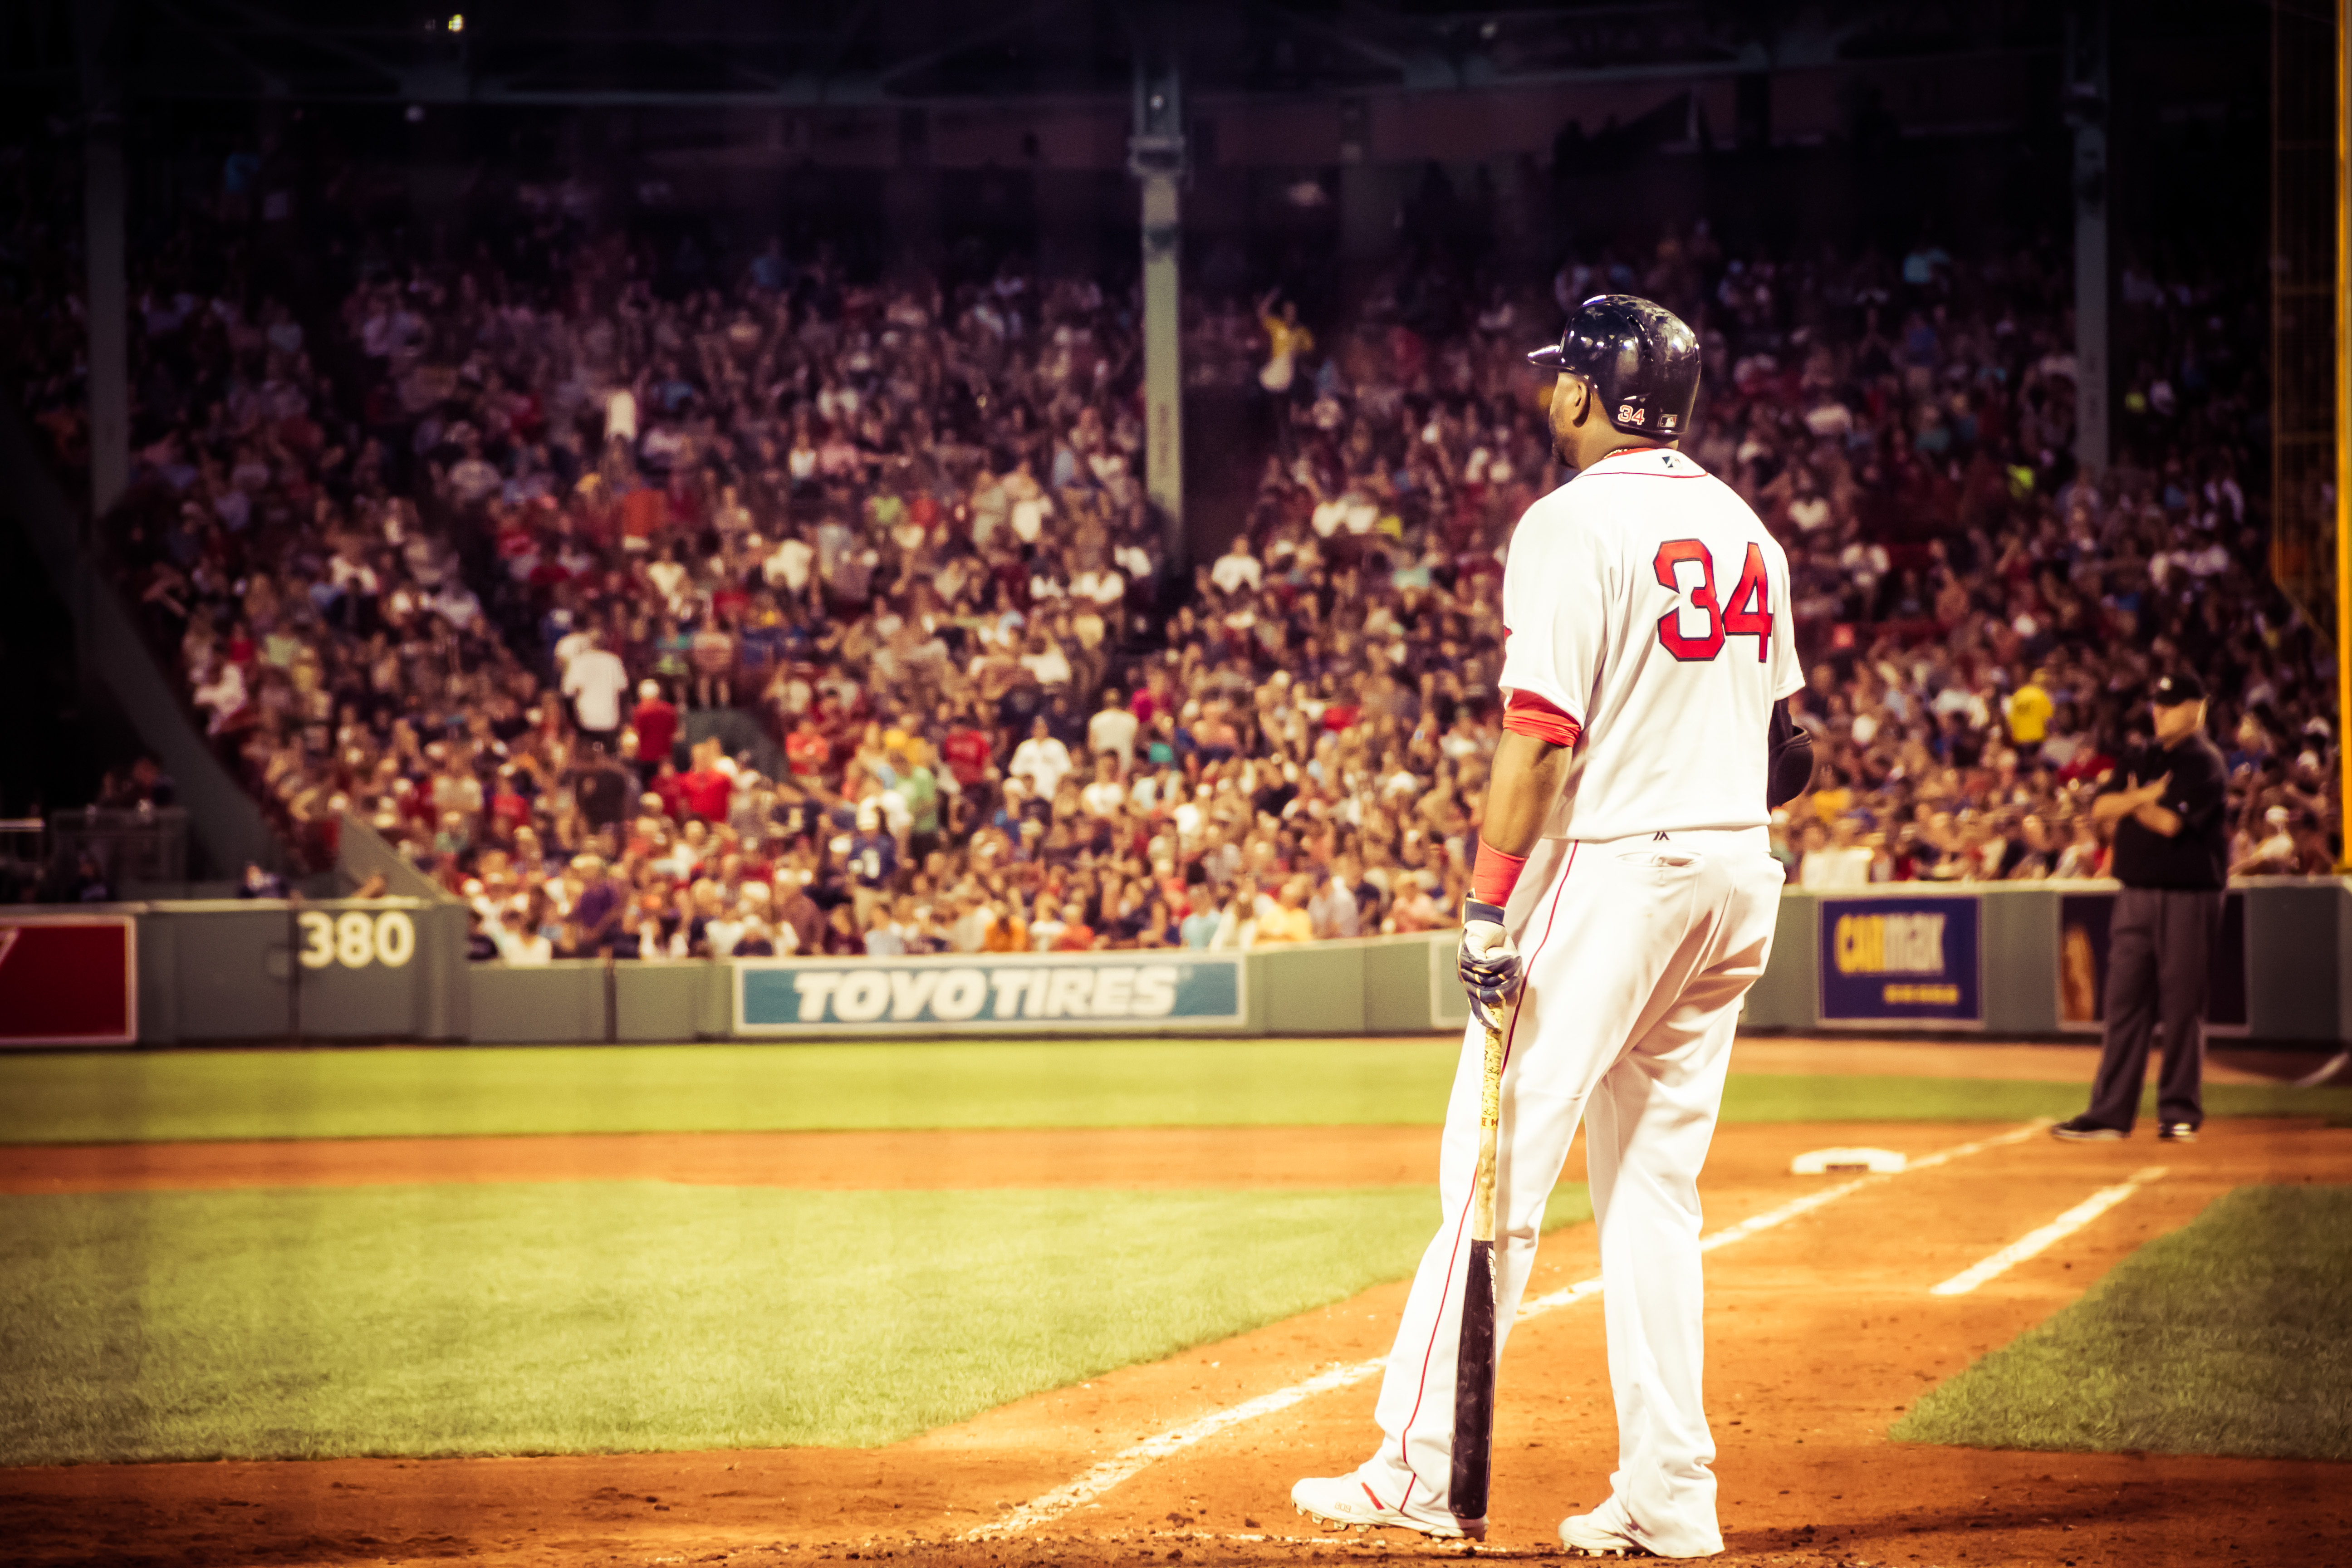 David Ortiz standing alone at plate edit 2 - photo by Renel Holton